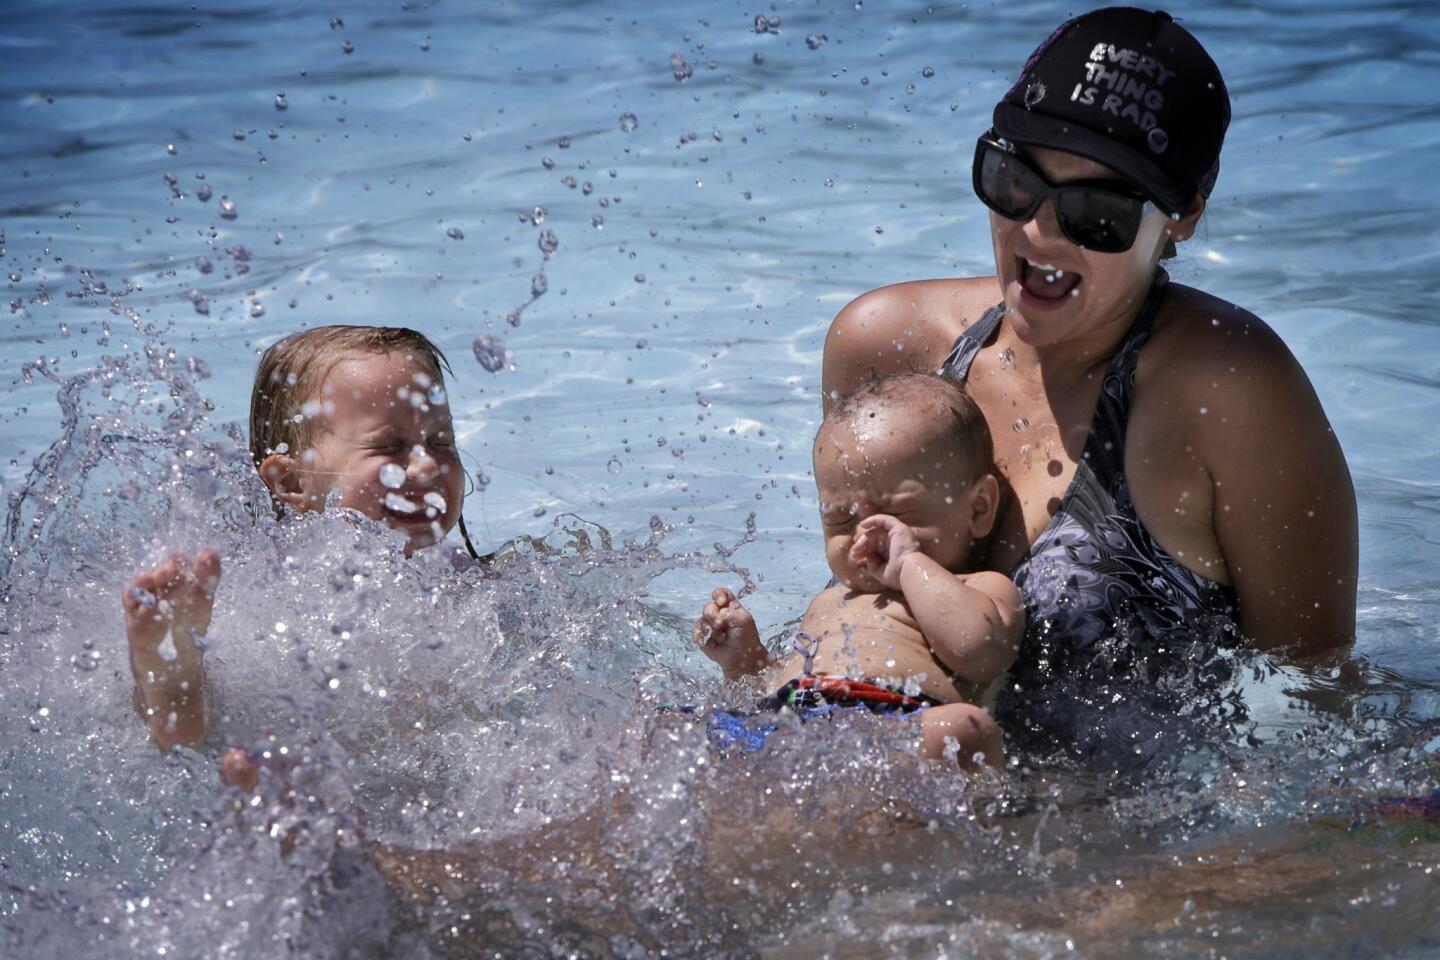 Brianna Bresnahan with her 10-month-old son Luc Menor and a family friend's daughter, Haylee Weinreich,5, cool off in a pool at Cucamonga-Guasti Regional Park in Rancho Cucamonga on Thursday.